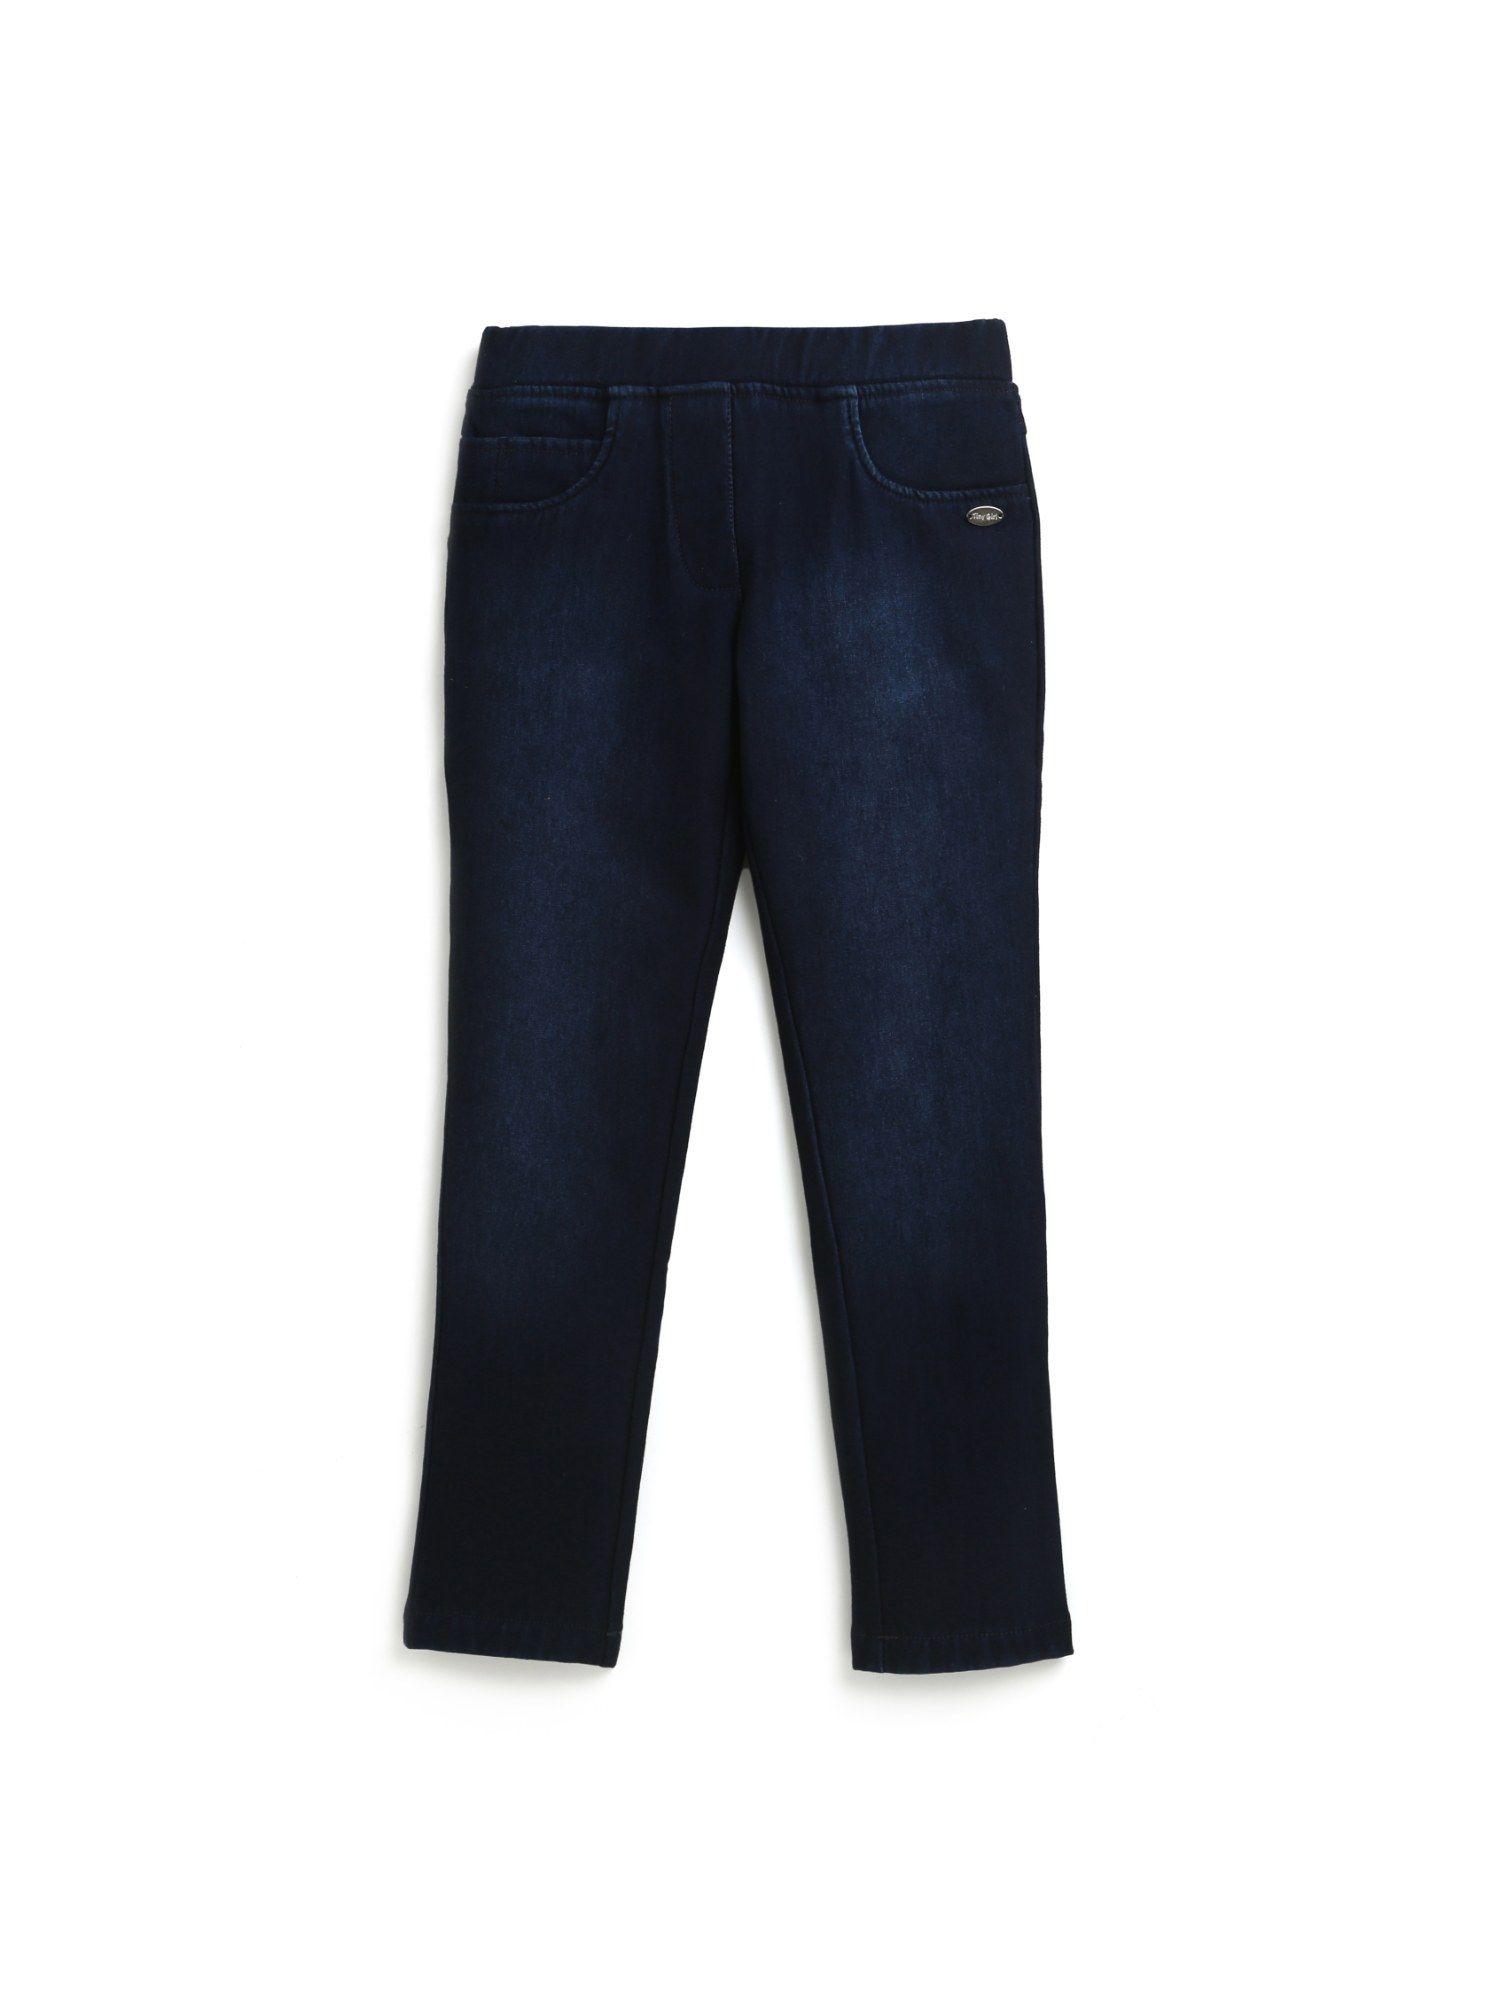 navy blue knitted cotton solid jeggings